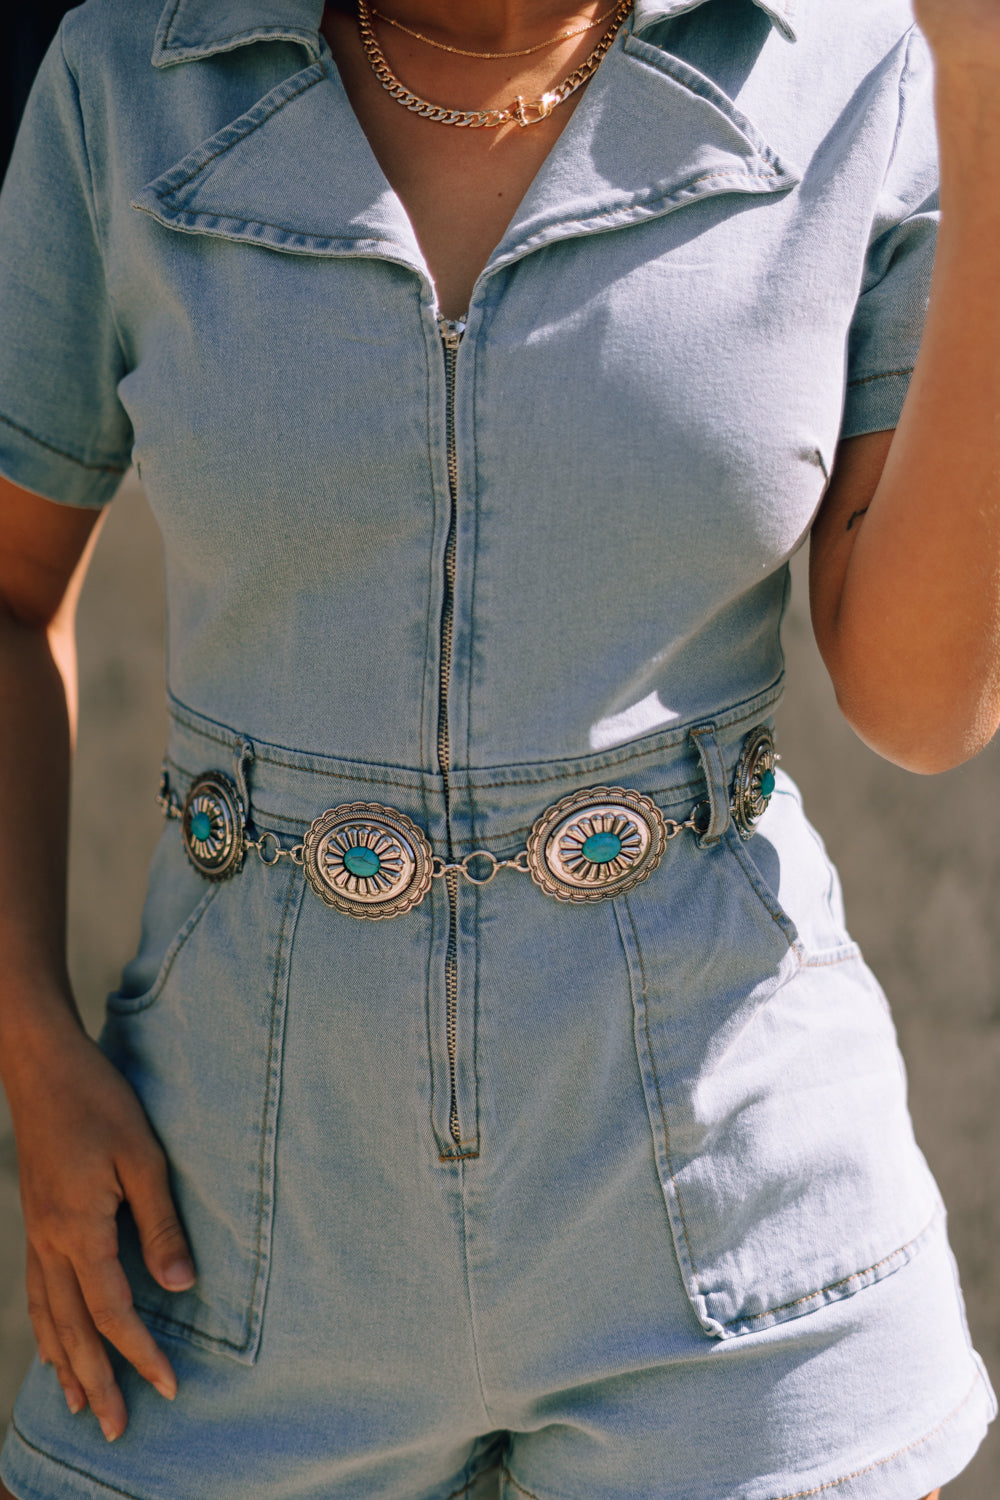 Close up front view of female model wearing the Hannah Silver & Turquoise Medallion Chain Belt which features Silver Metal Medallions, Turquoise Stone Details, Chain Links and Adjustable Clasp Closure